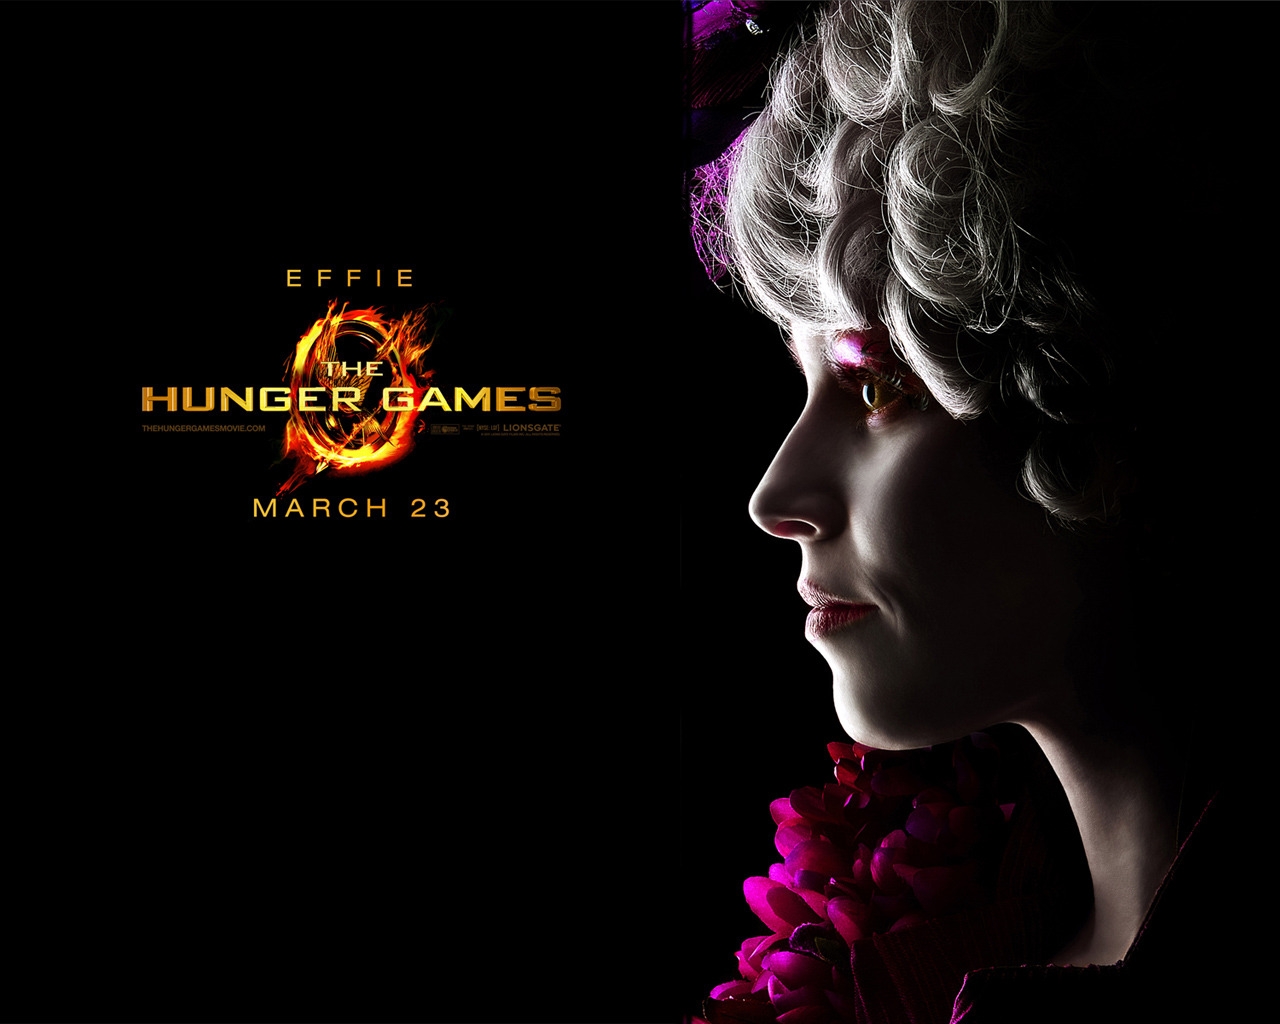 The Hunger Games Effie for 1280 x 1024 resolution